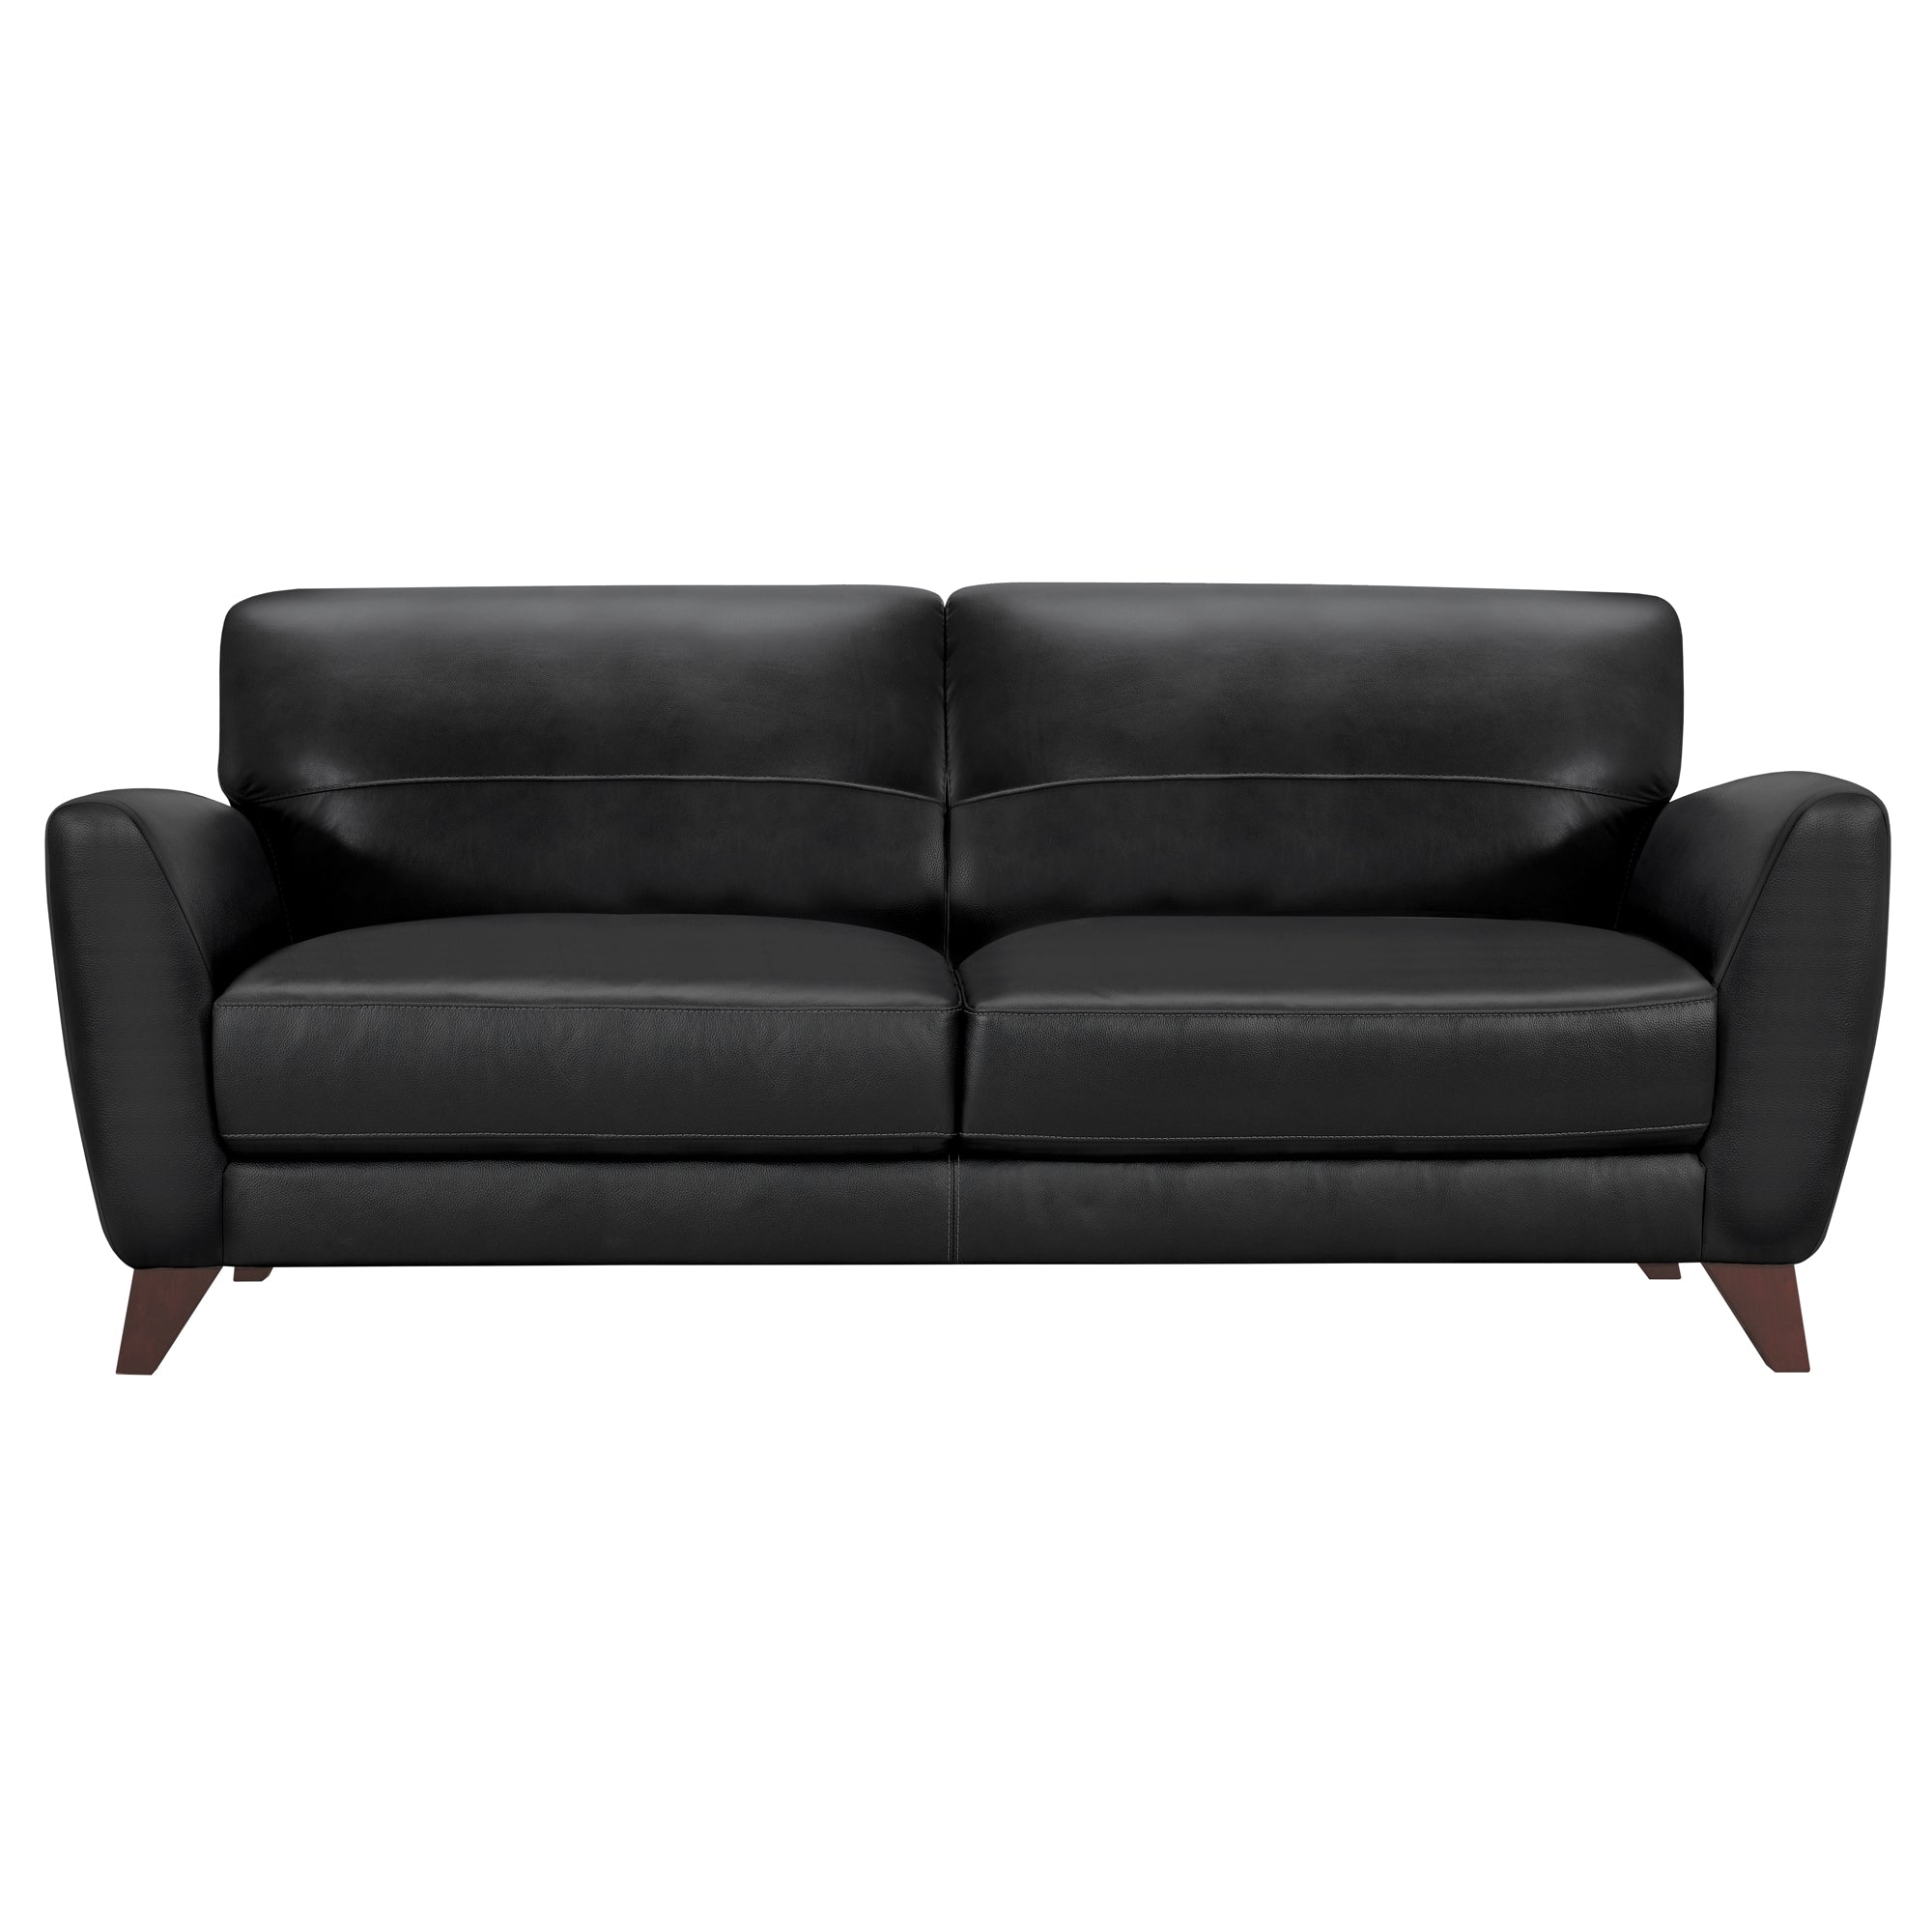 Armen Living Lcjd3bl Jedd Contemporary Sofa In Genuine Black Leather With Brown Wood Legs